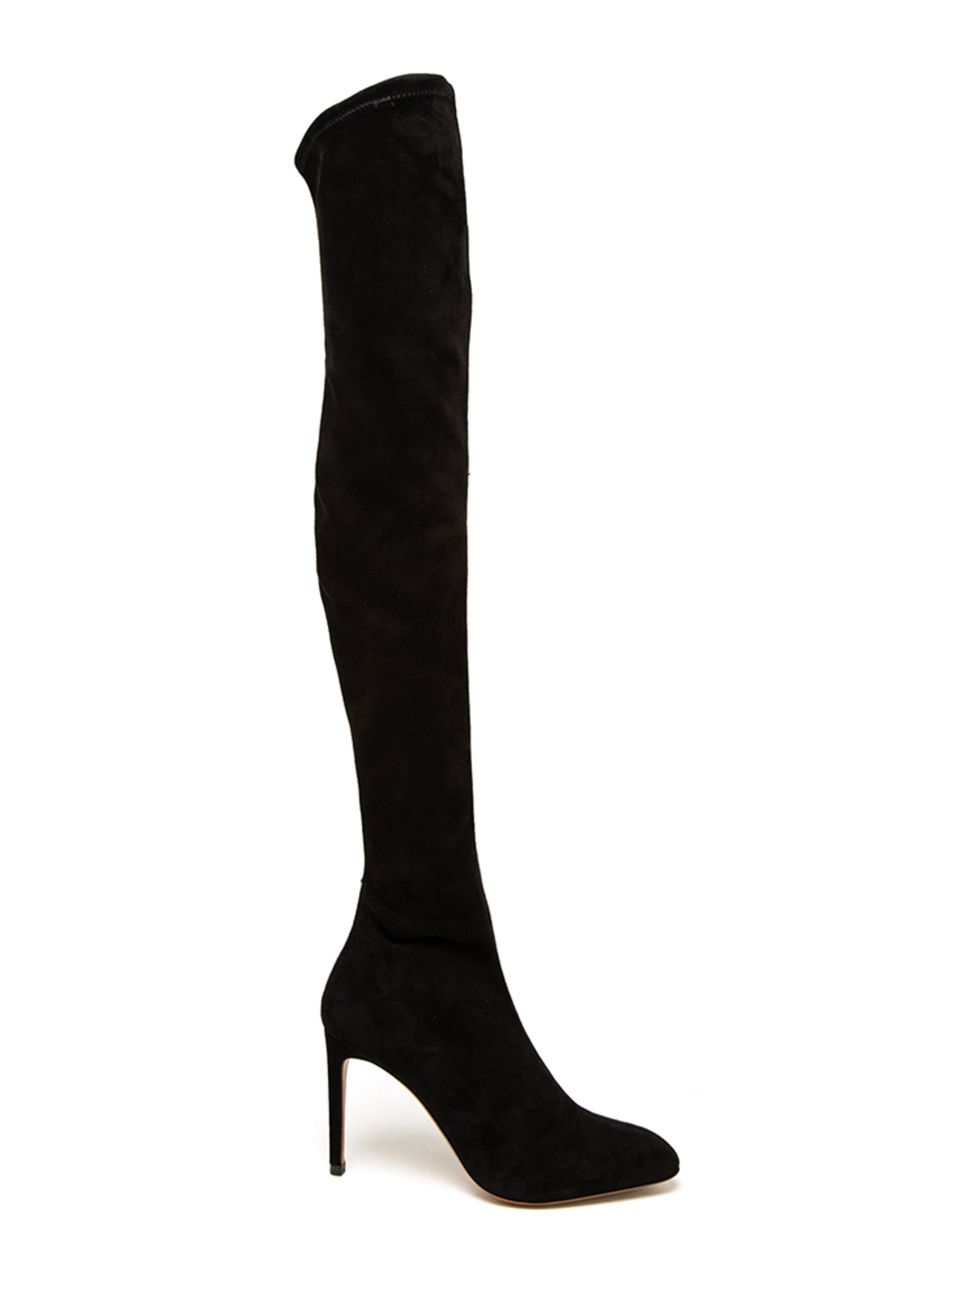 <p><a href="http://www.brownsfashion.com/product/LS0552830002/027/thigh-high-suede-boots" target="_blank">£1,300, Azzedine Alaïa</a></p>